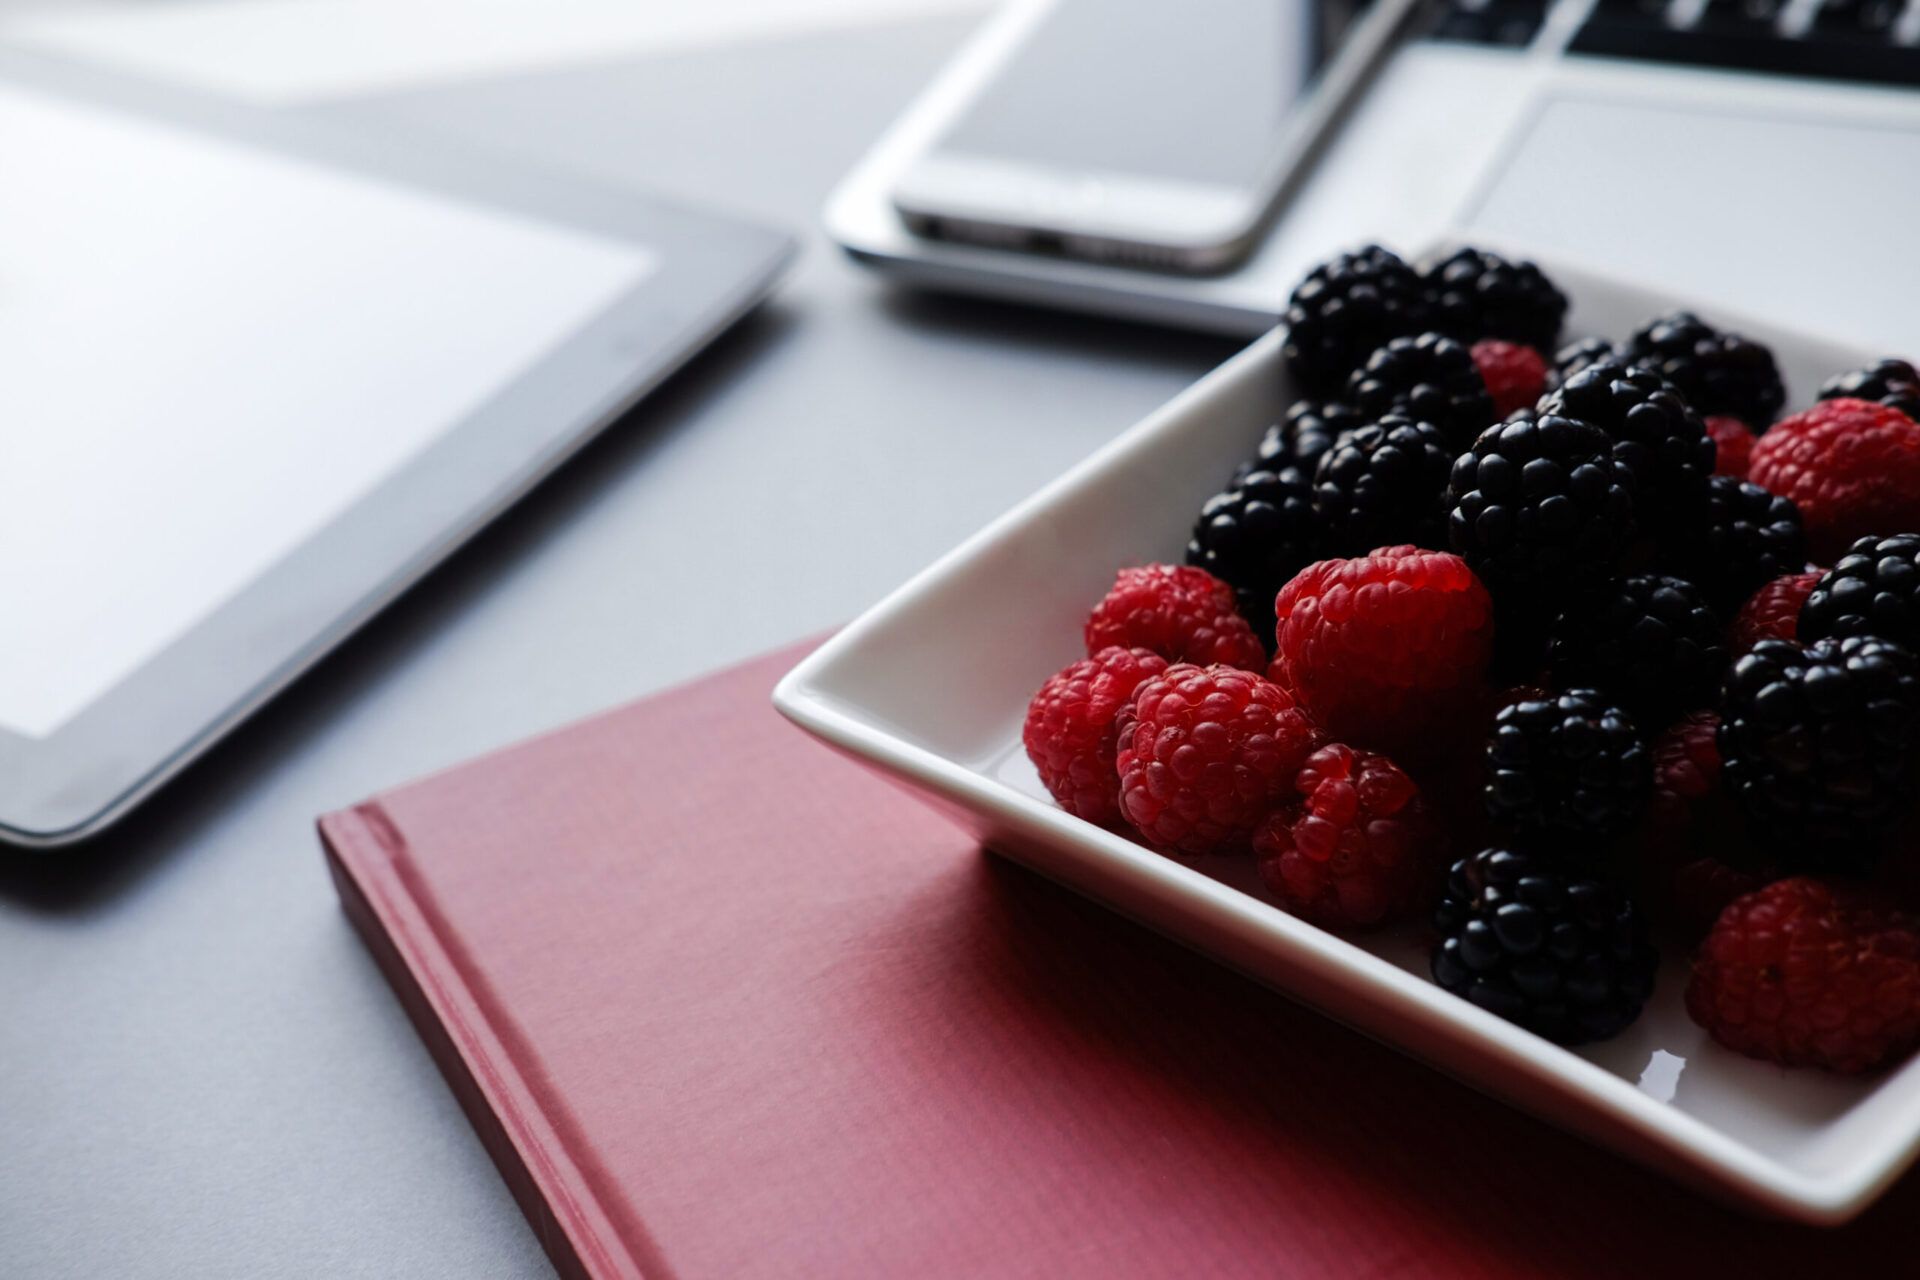 raspberry and blackberries, healthy lunch in the office